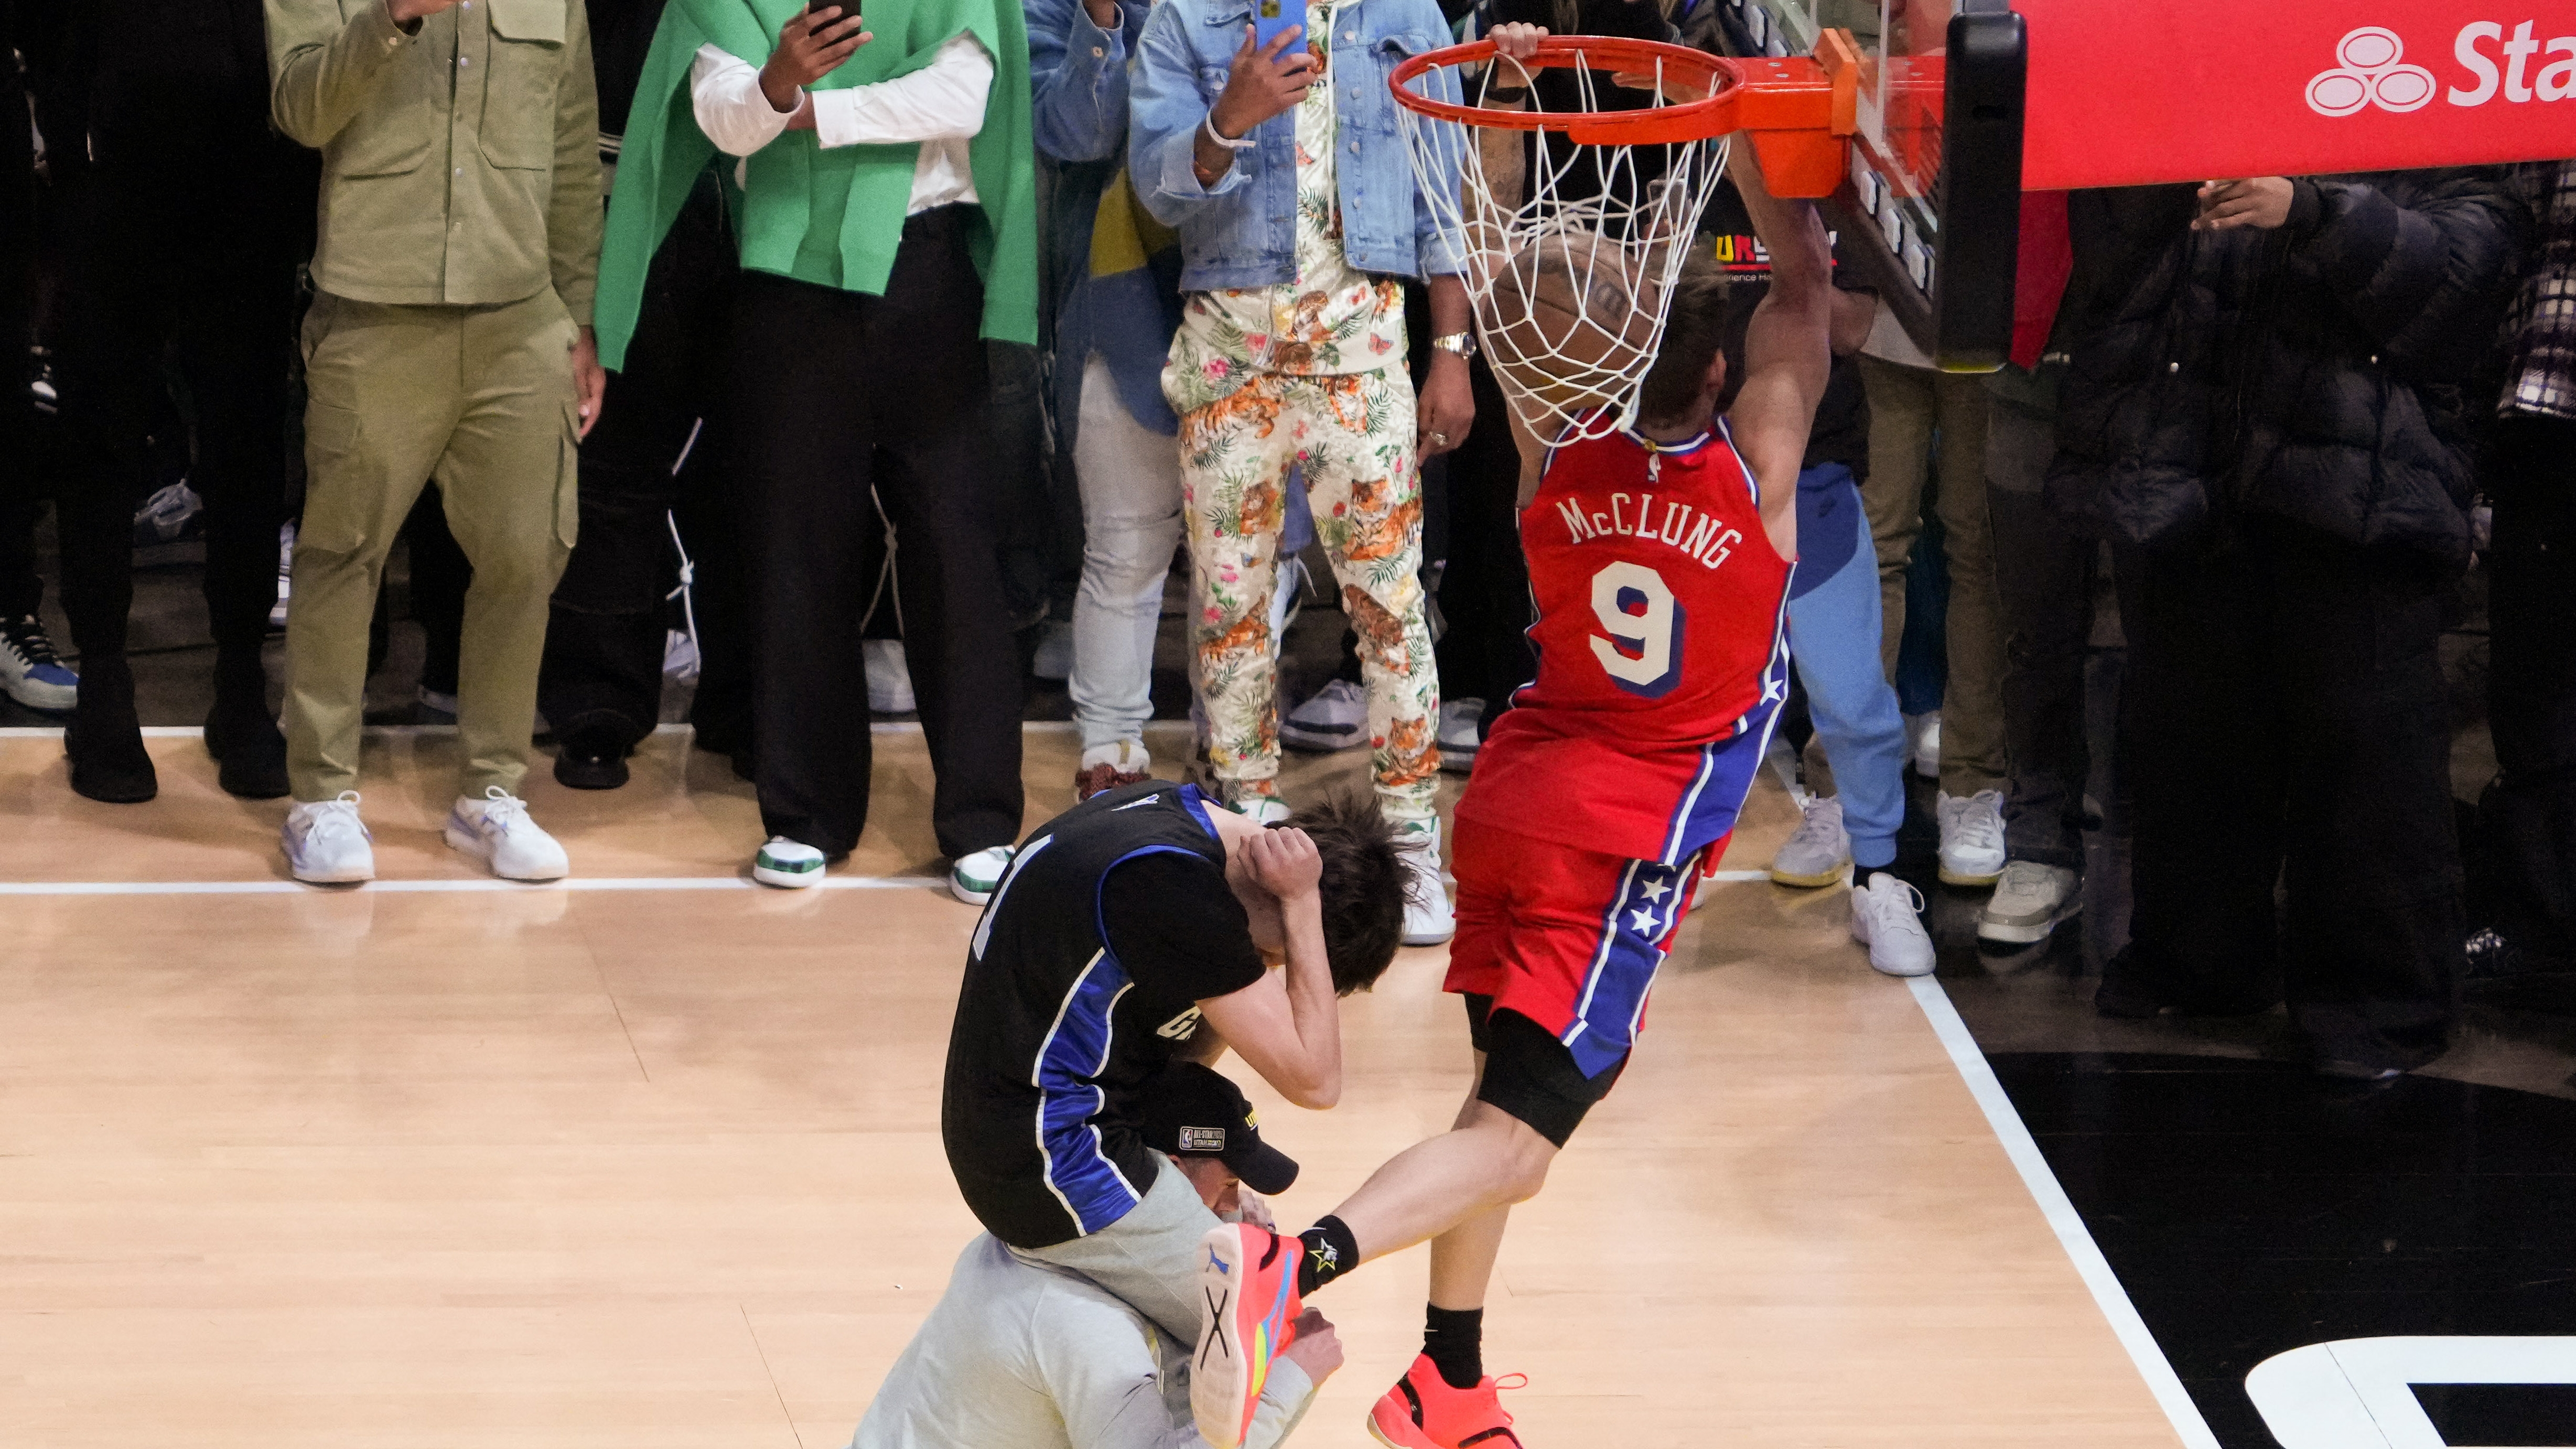 Feb 18, 2023; Salt Lake City, UT, USA; Philadelphia 76ers guard Mac McClung (9) dunks in the Dunk Contest during the 2023 All Star Saturday Night at Vivint Arena. Mandatory Credit: Kirby Lee-USA TODAY Sports